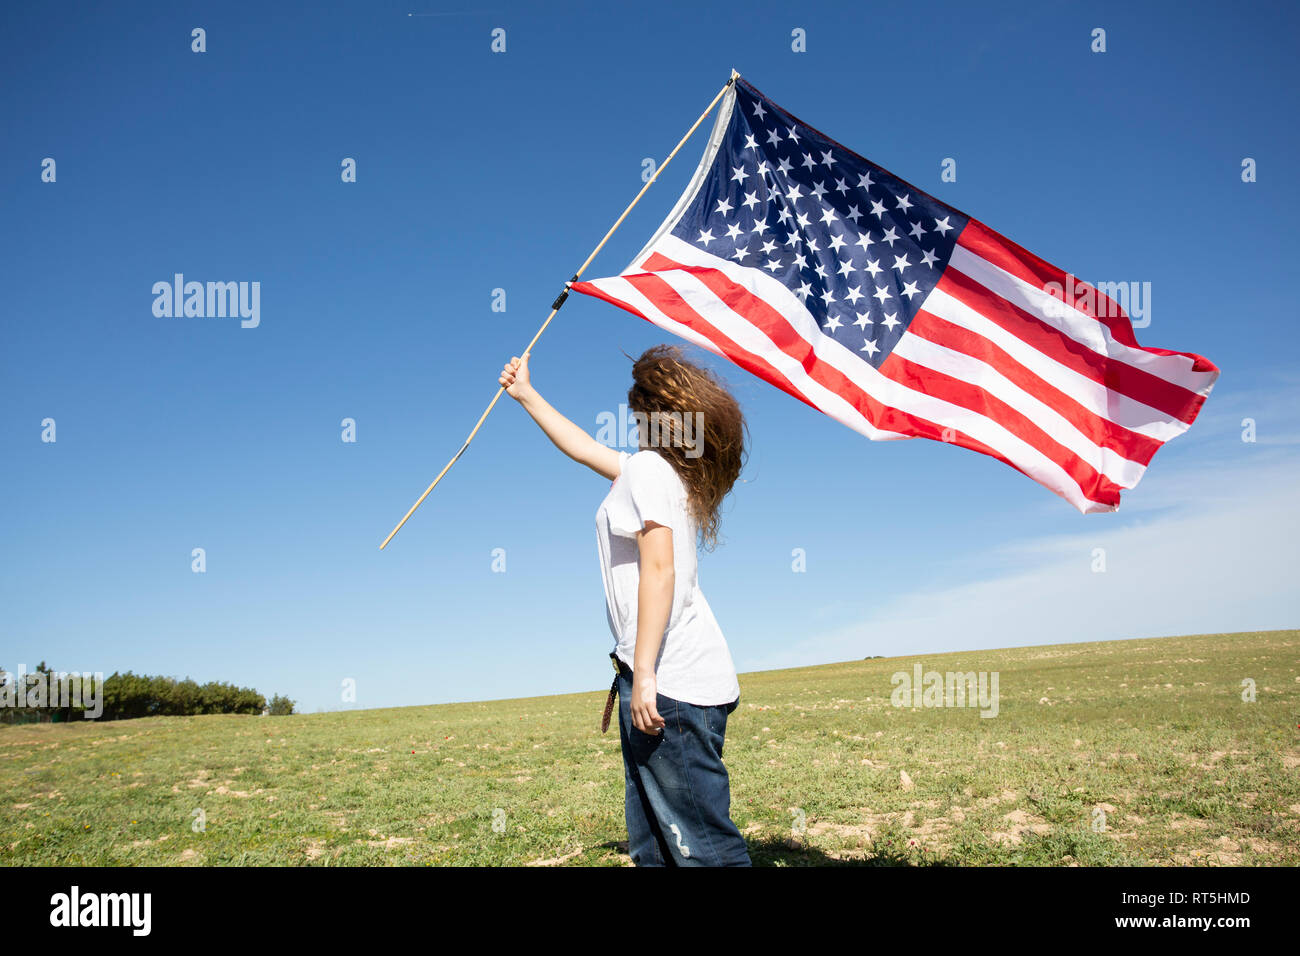 Girl holding American flag on field in remote landscape Stock Photo